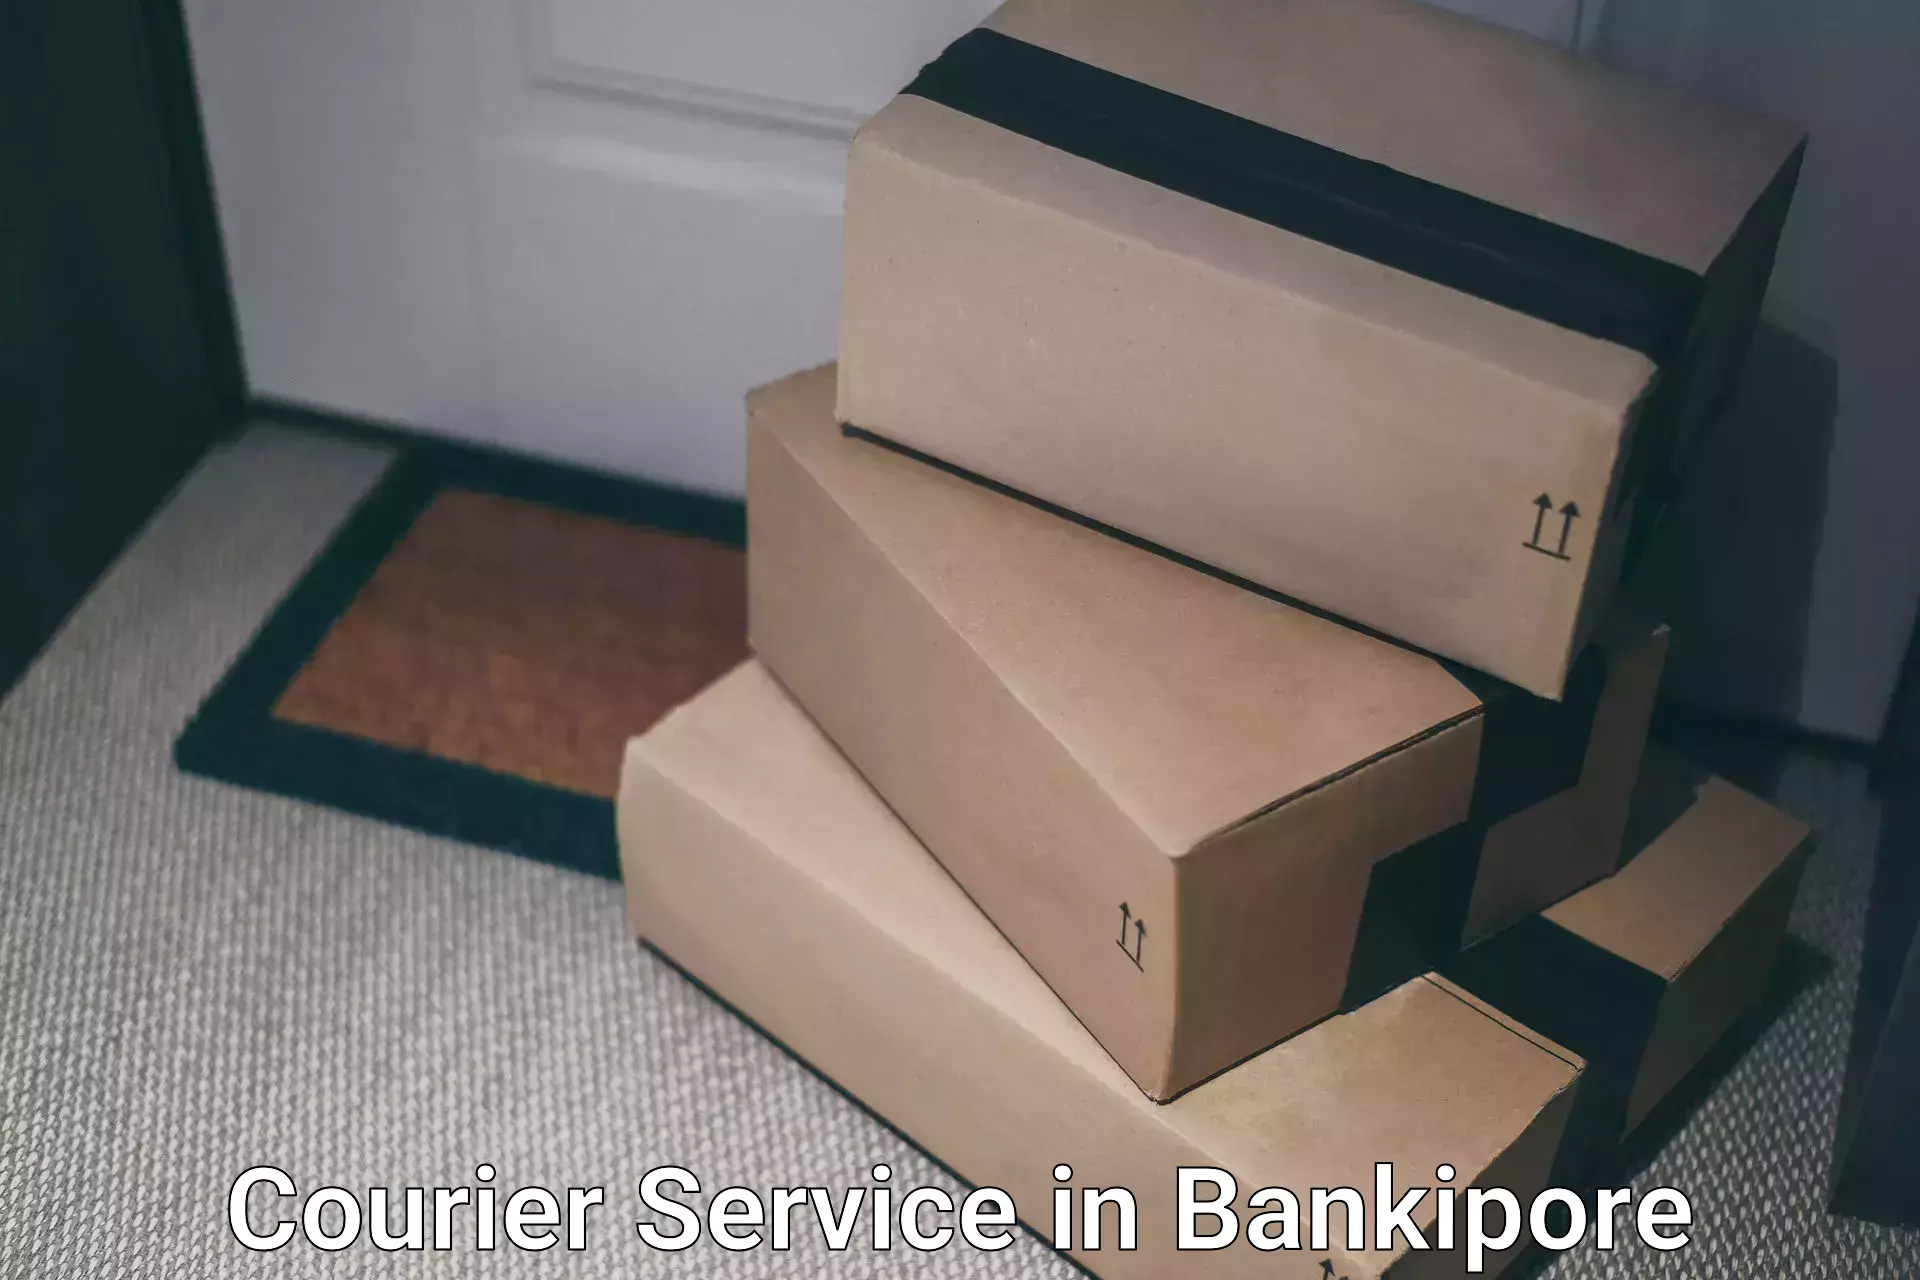 Parcel handling and care in Bankipore